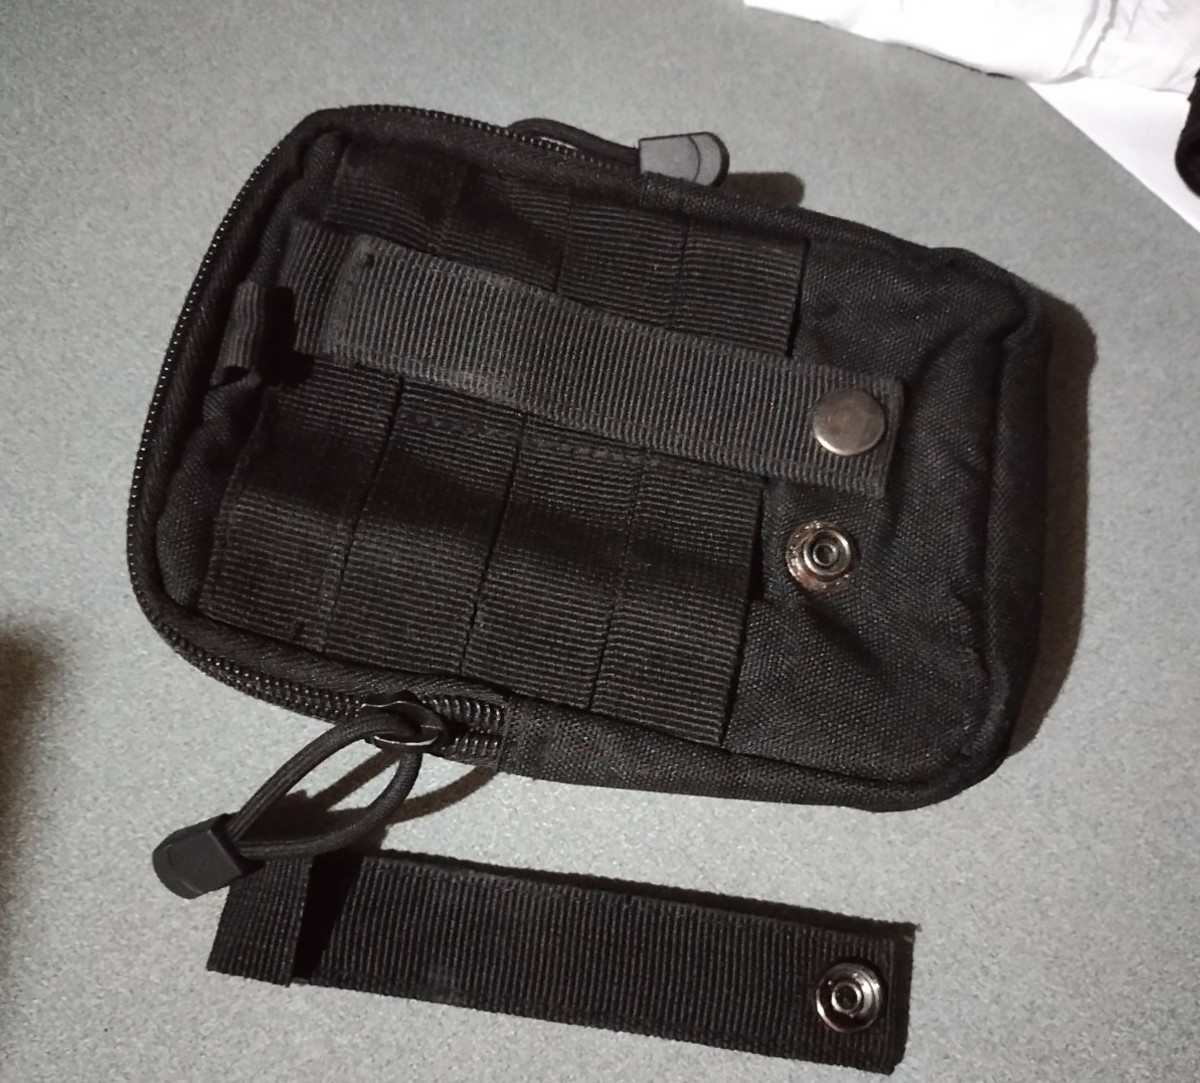 My Cheapo EDC Pouch Failed After Three Months